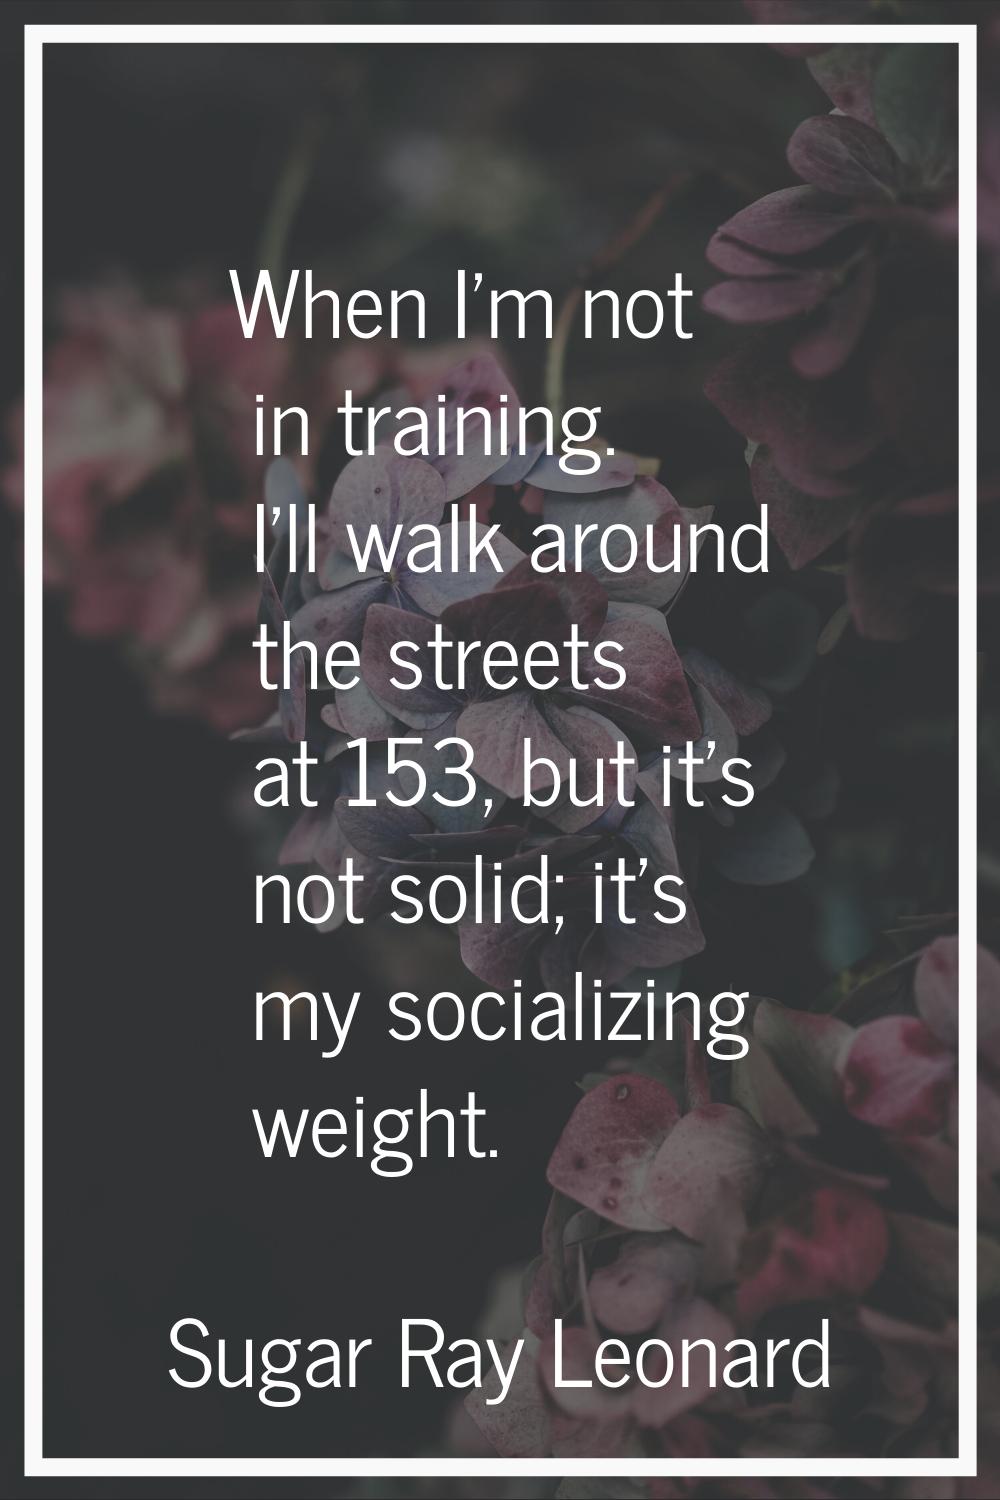 When I'm not in training. I'll walk around the streets at 153, but it's not solid; it's my socializ